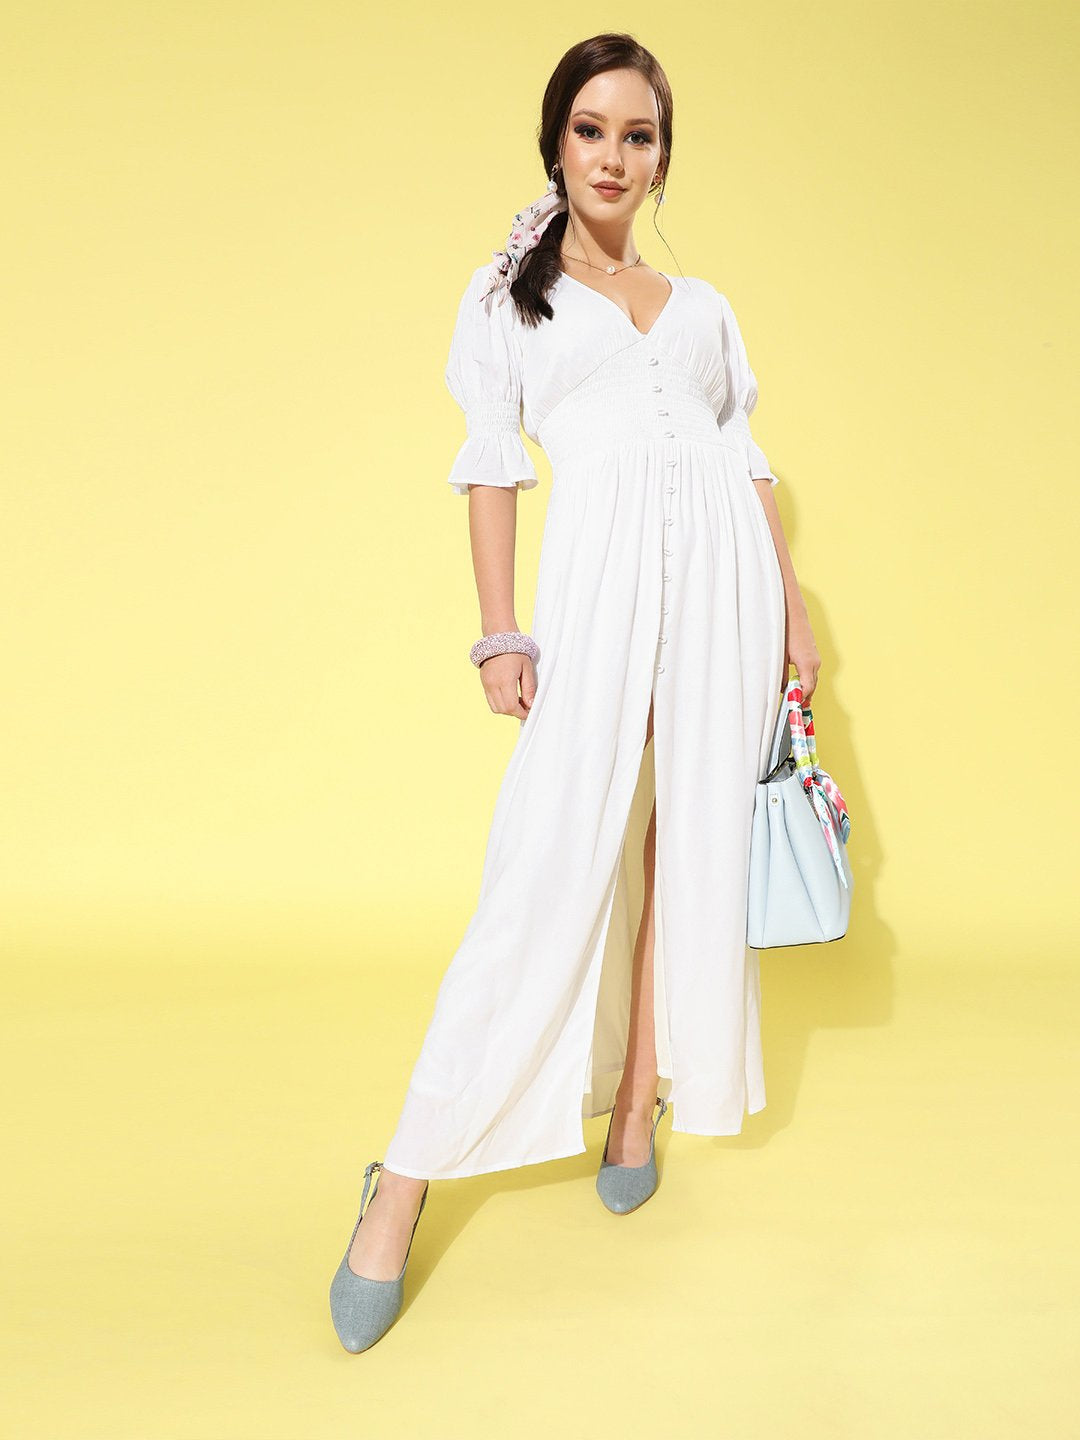 SCORPIUS White Solid front slit long Dress